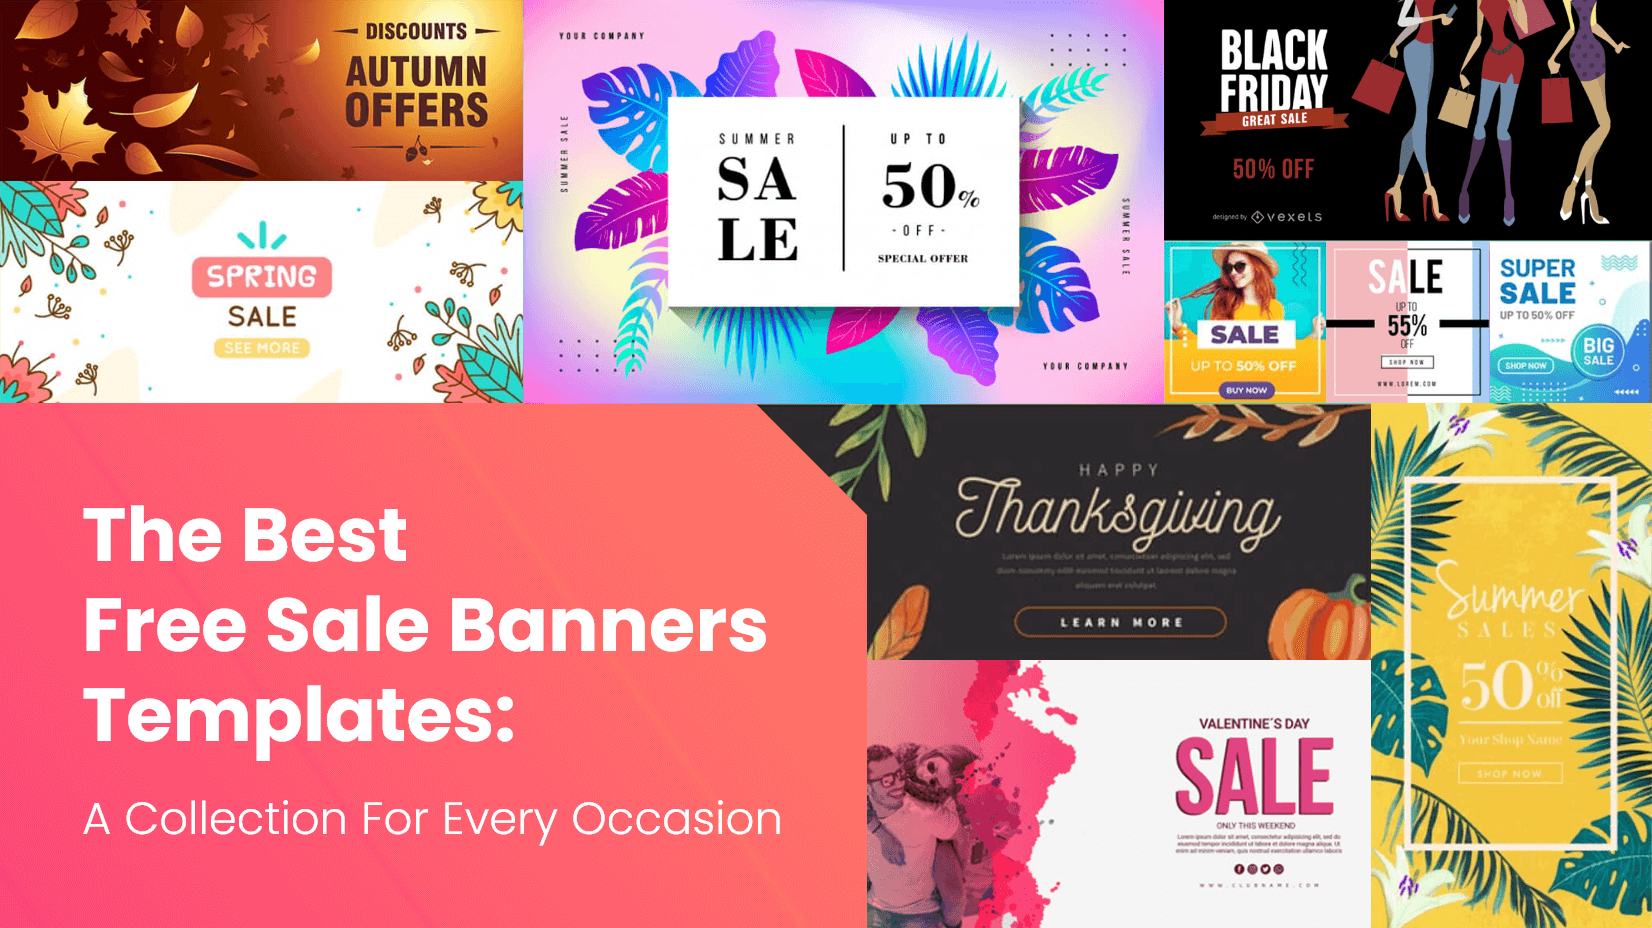 The Best Free Sale Banners Templates: A Collection For Every With Website Banner Templates Free Download